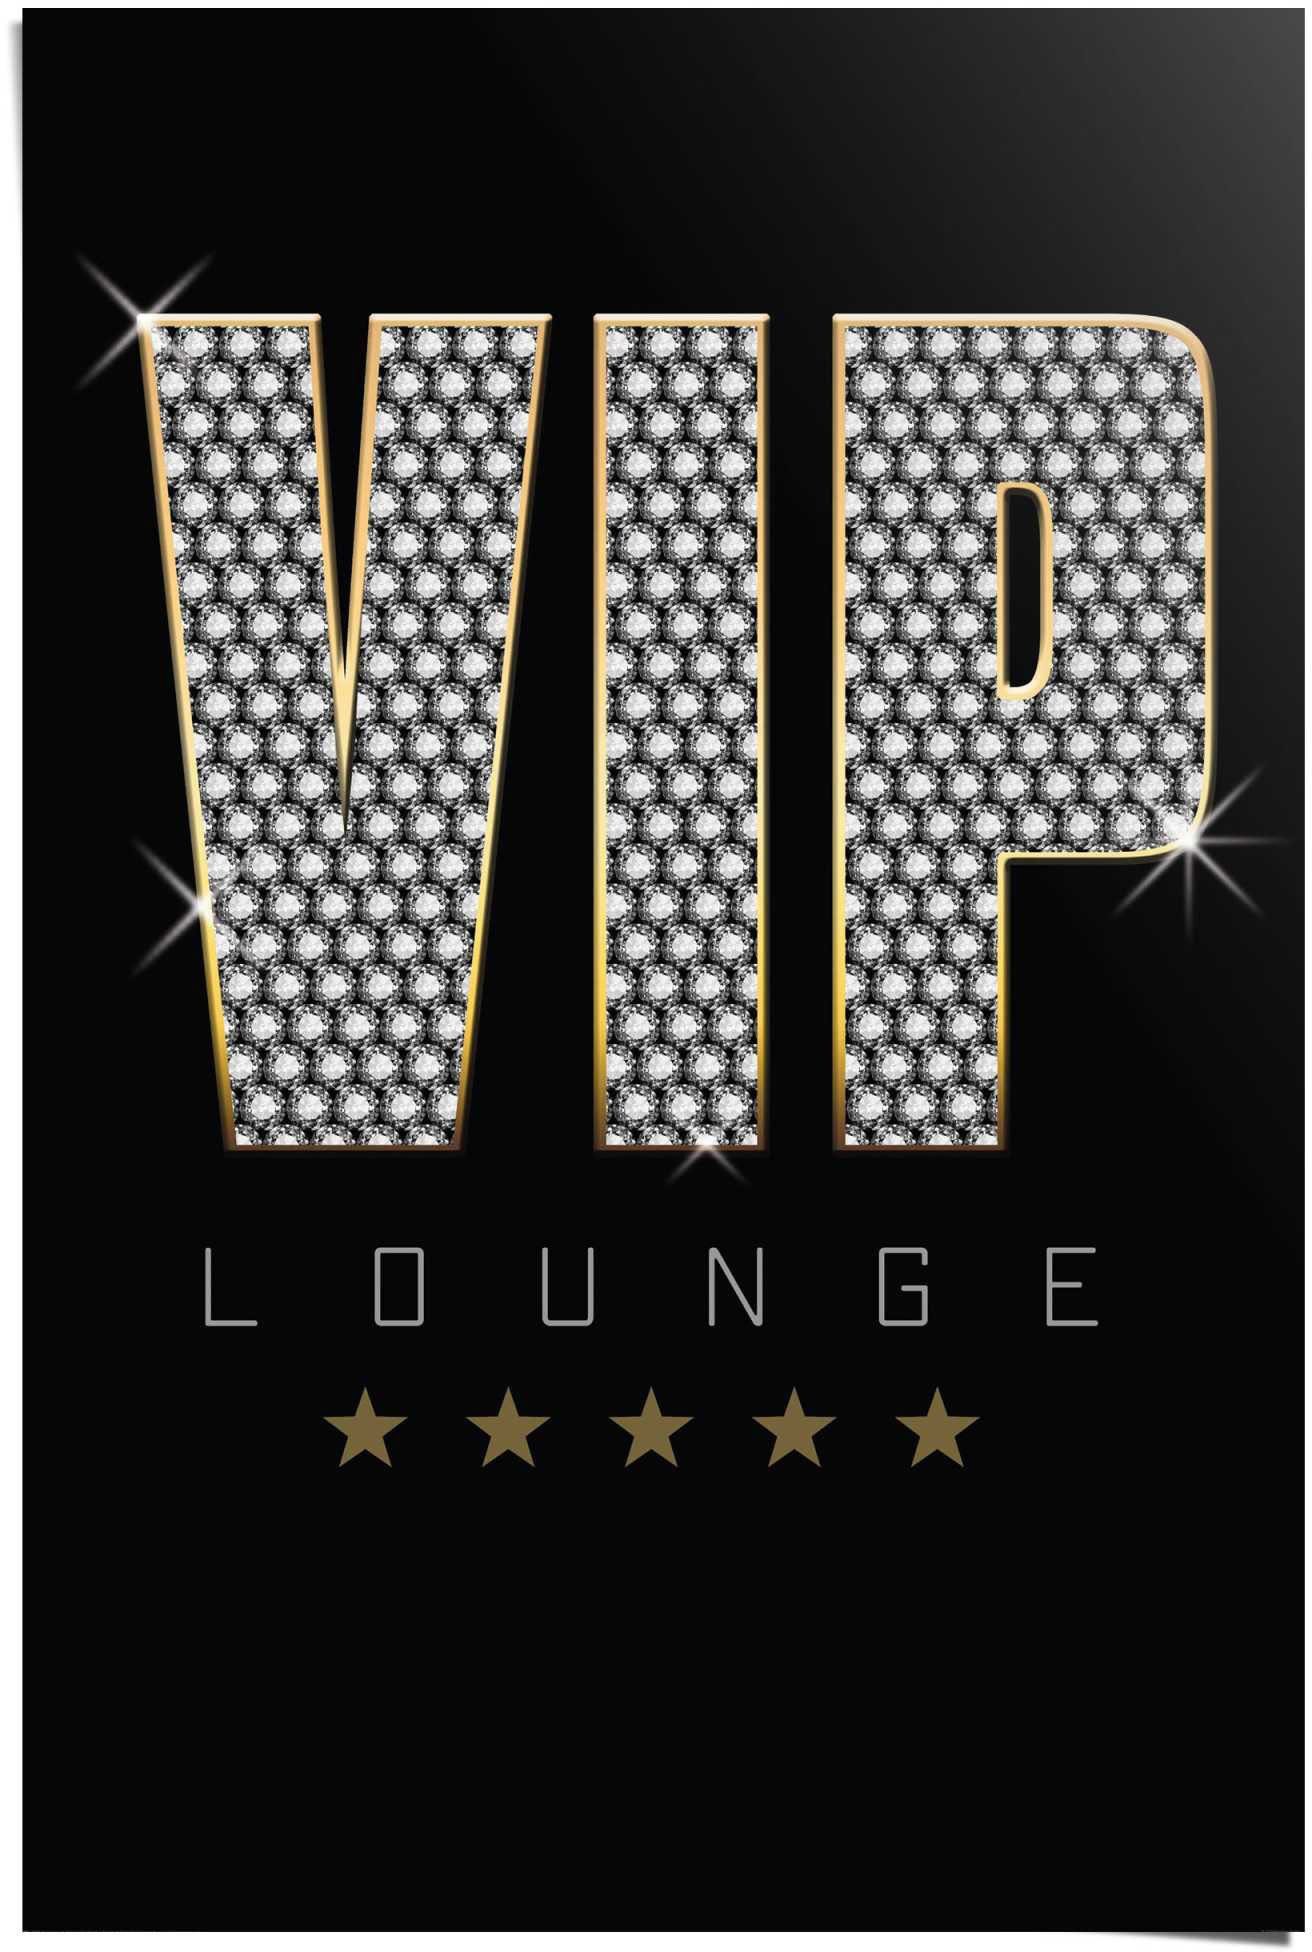 (1 Lounge, Poster St) Reinders! Vip